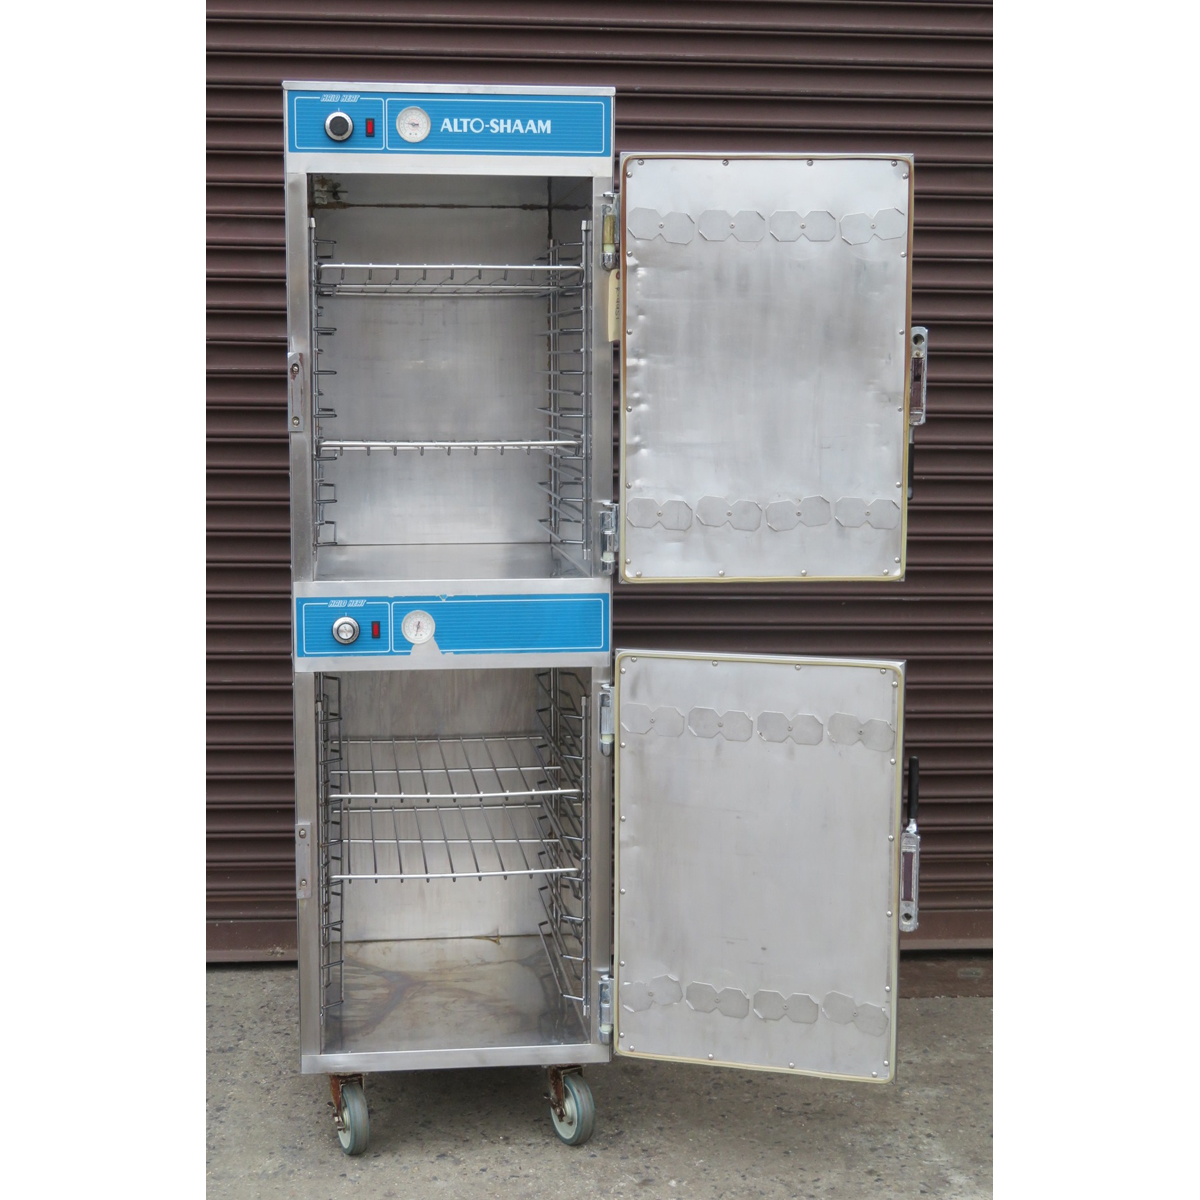 Alto Shaam 1000-UP Double Hot Holding Cabinet, Used Great Condition image 4